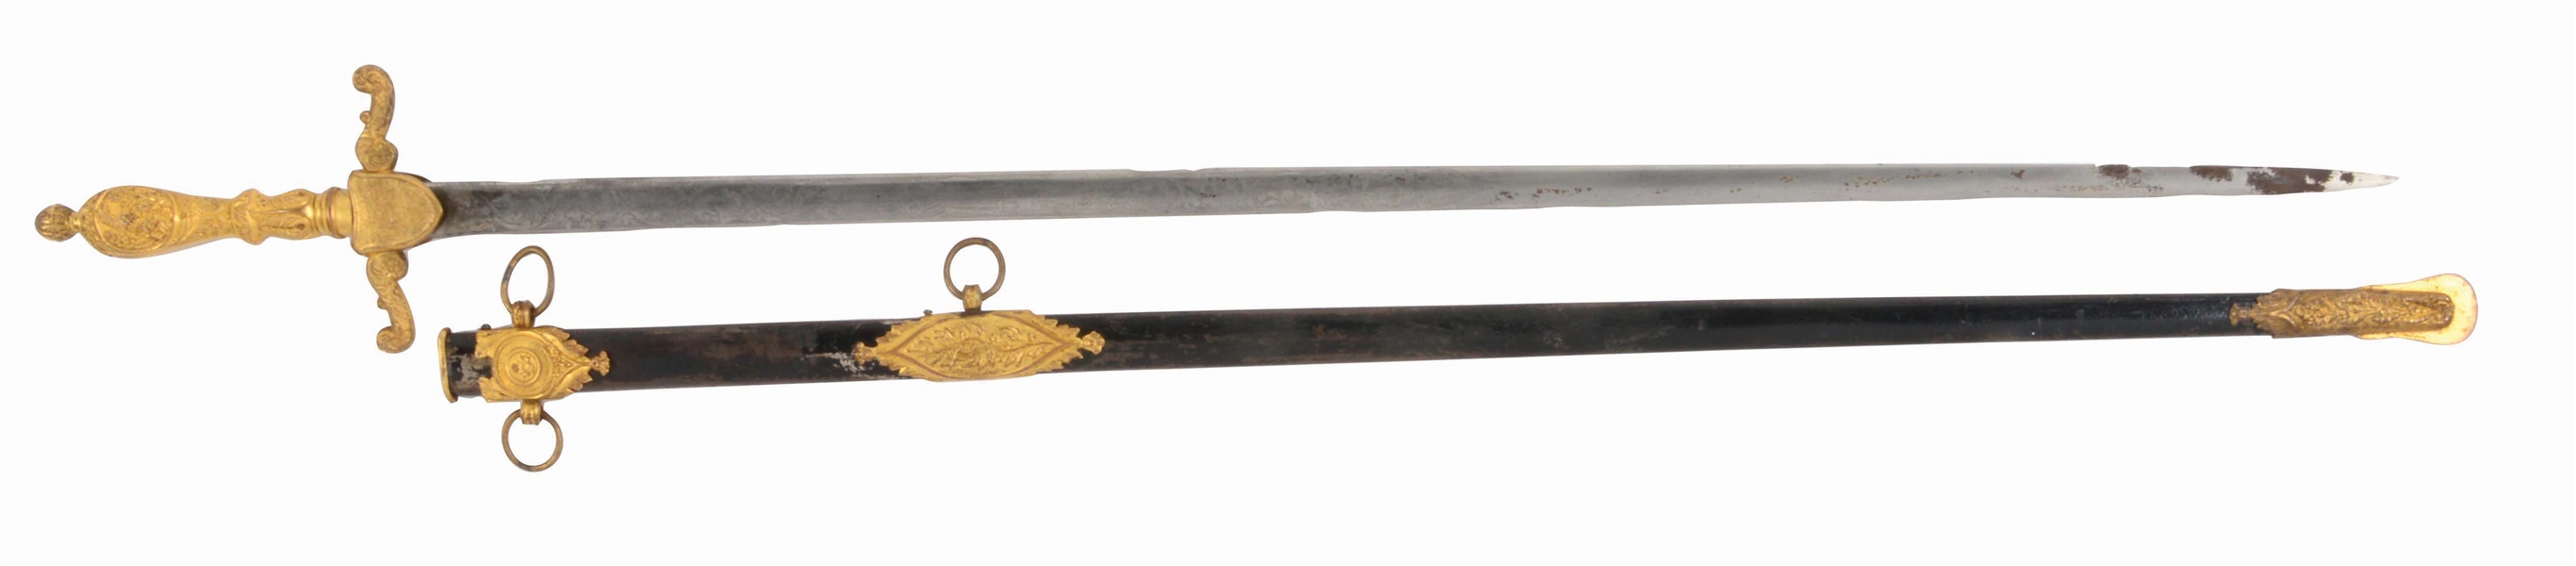 SCARCE U.S. MODEL 1840 PAY DEPARTMENT SWORD WITH SCABBARD.